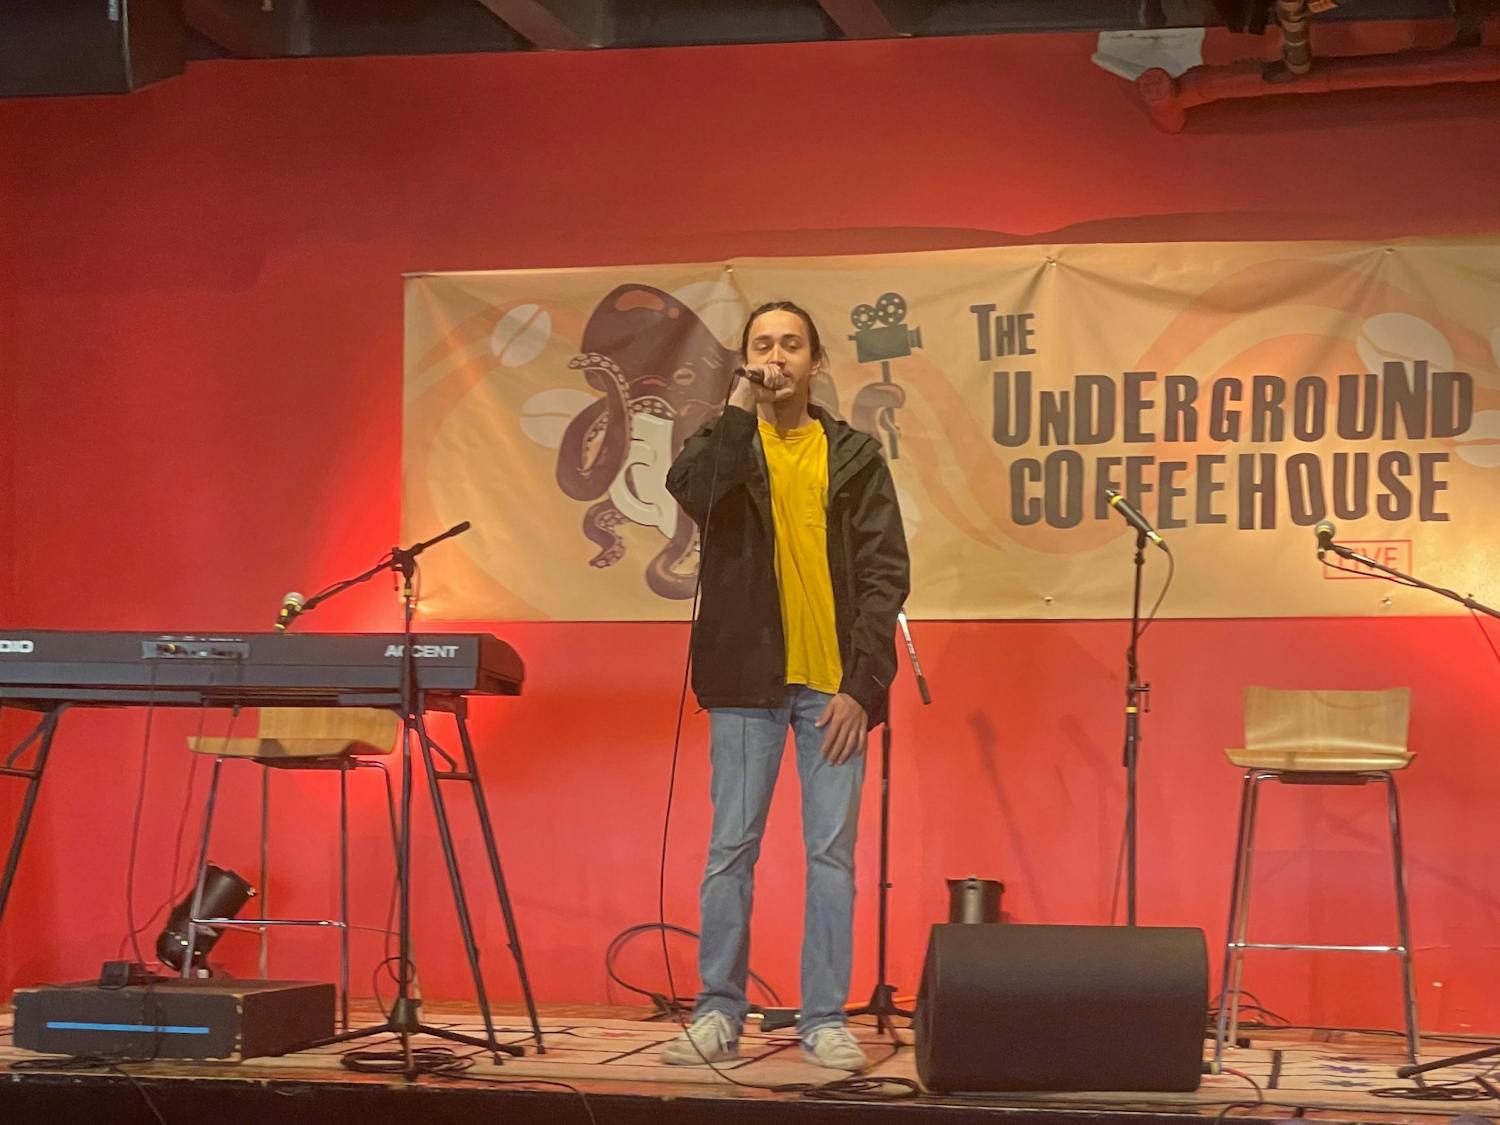 (2) An open mic at The Underground